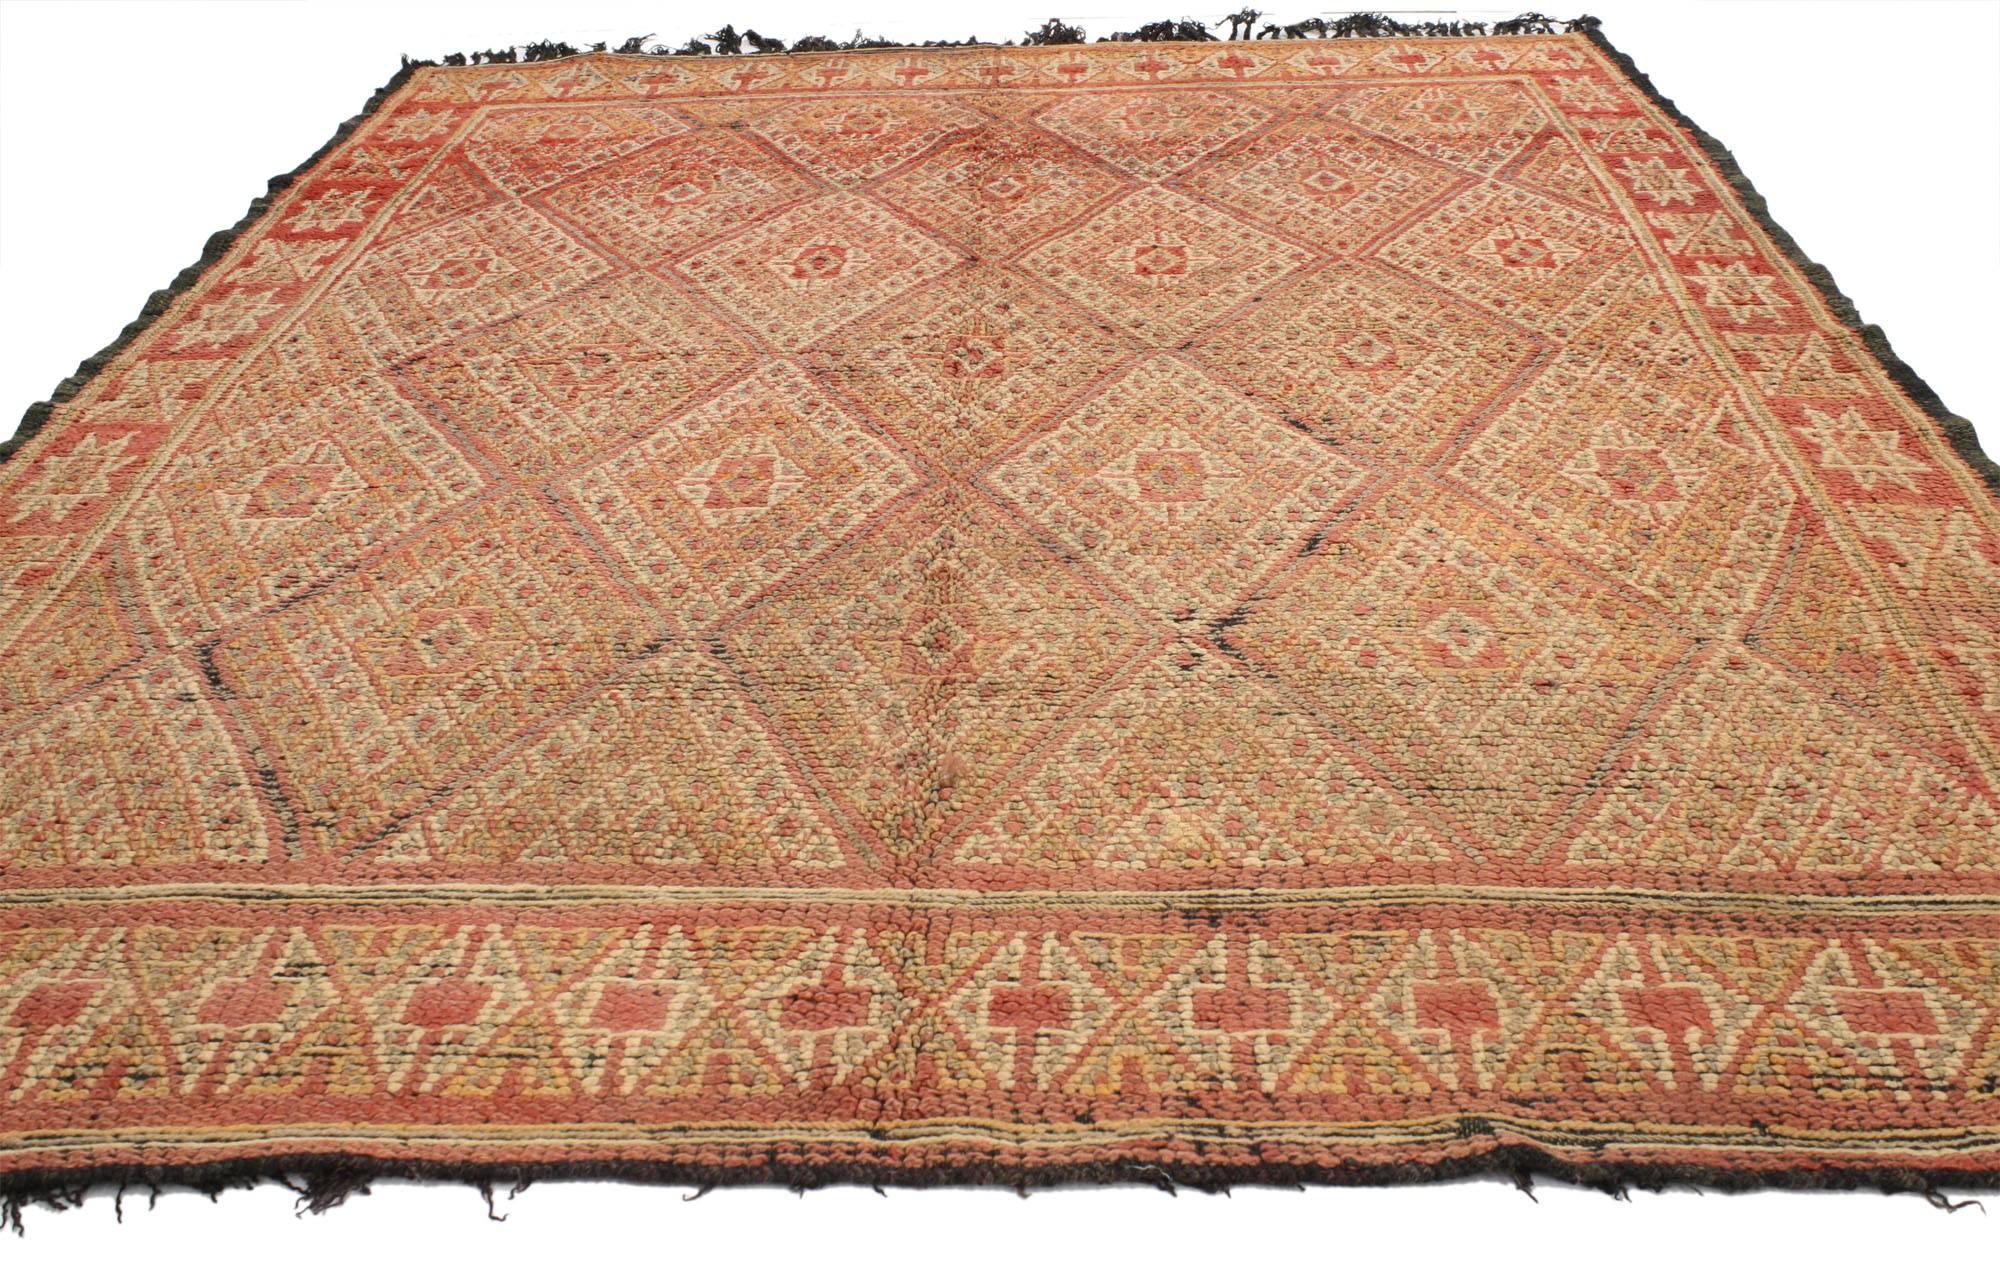 20615, vintage Berber Moroccan rug with tribal style. Muted shades of red and beige contrast to allow the intricate detail of the woven geometric motifs to take the foreground of this vintage Berber Moroccan rug. The diamond shape that is repeated